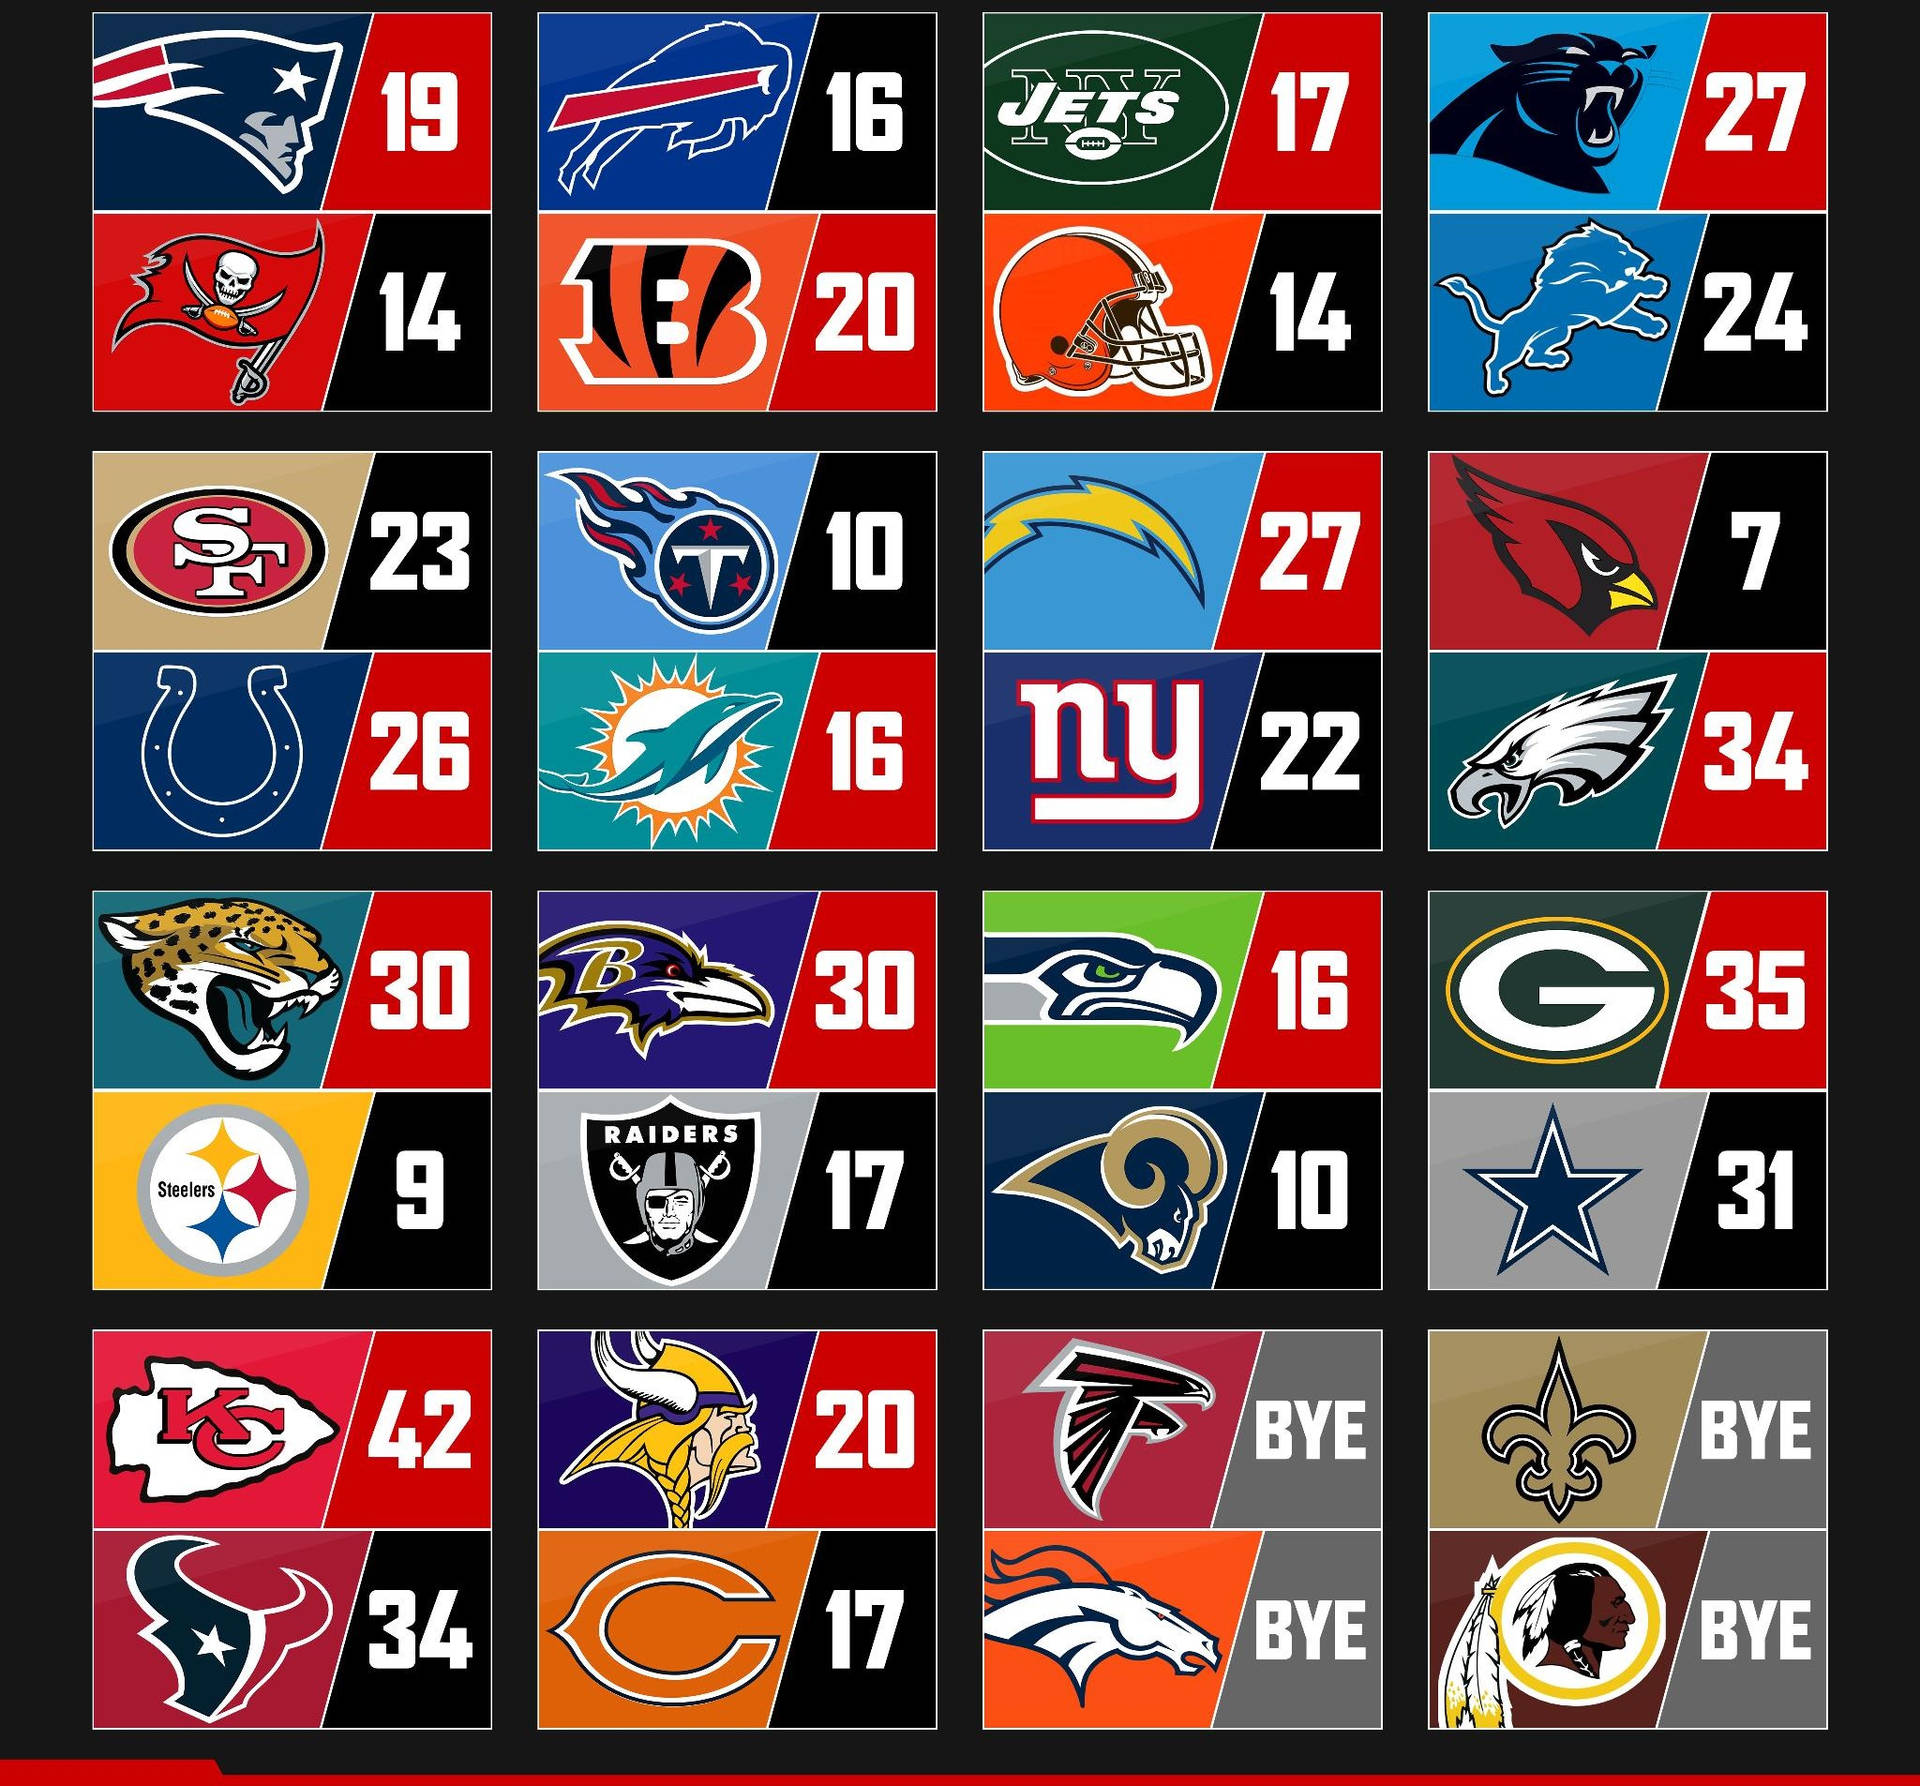 Nfl Scores With Football Team Logos Wallpaper